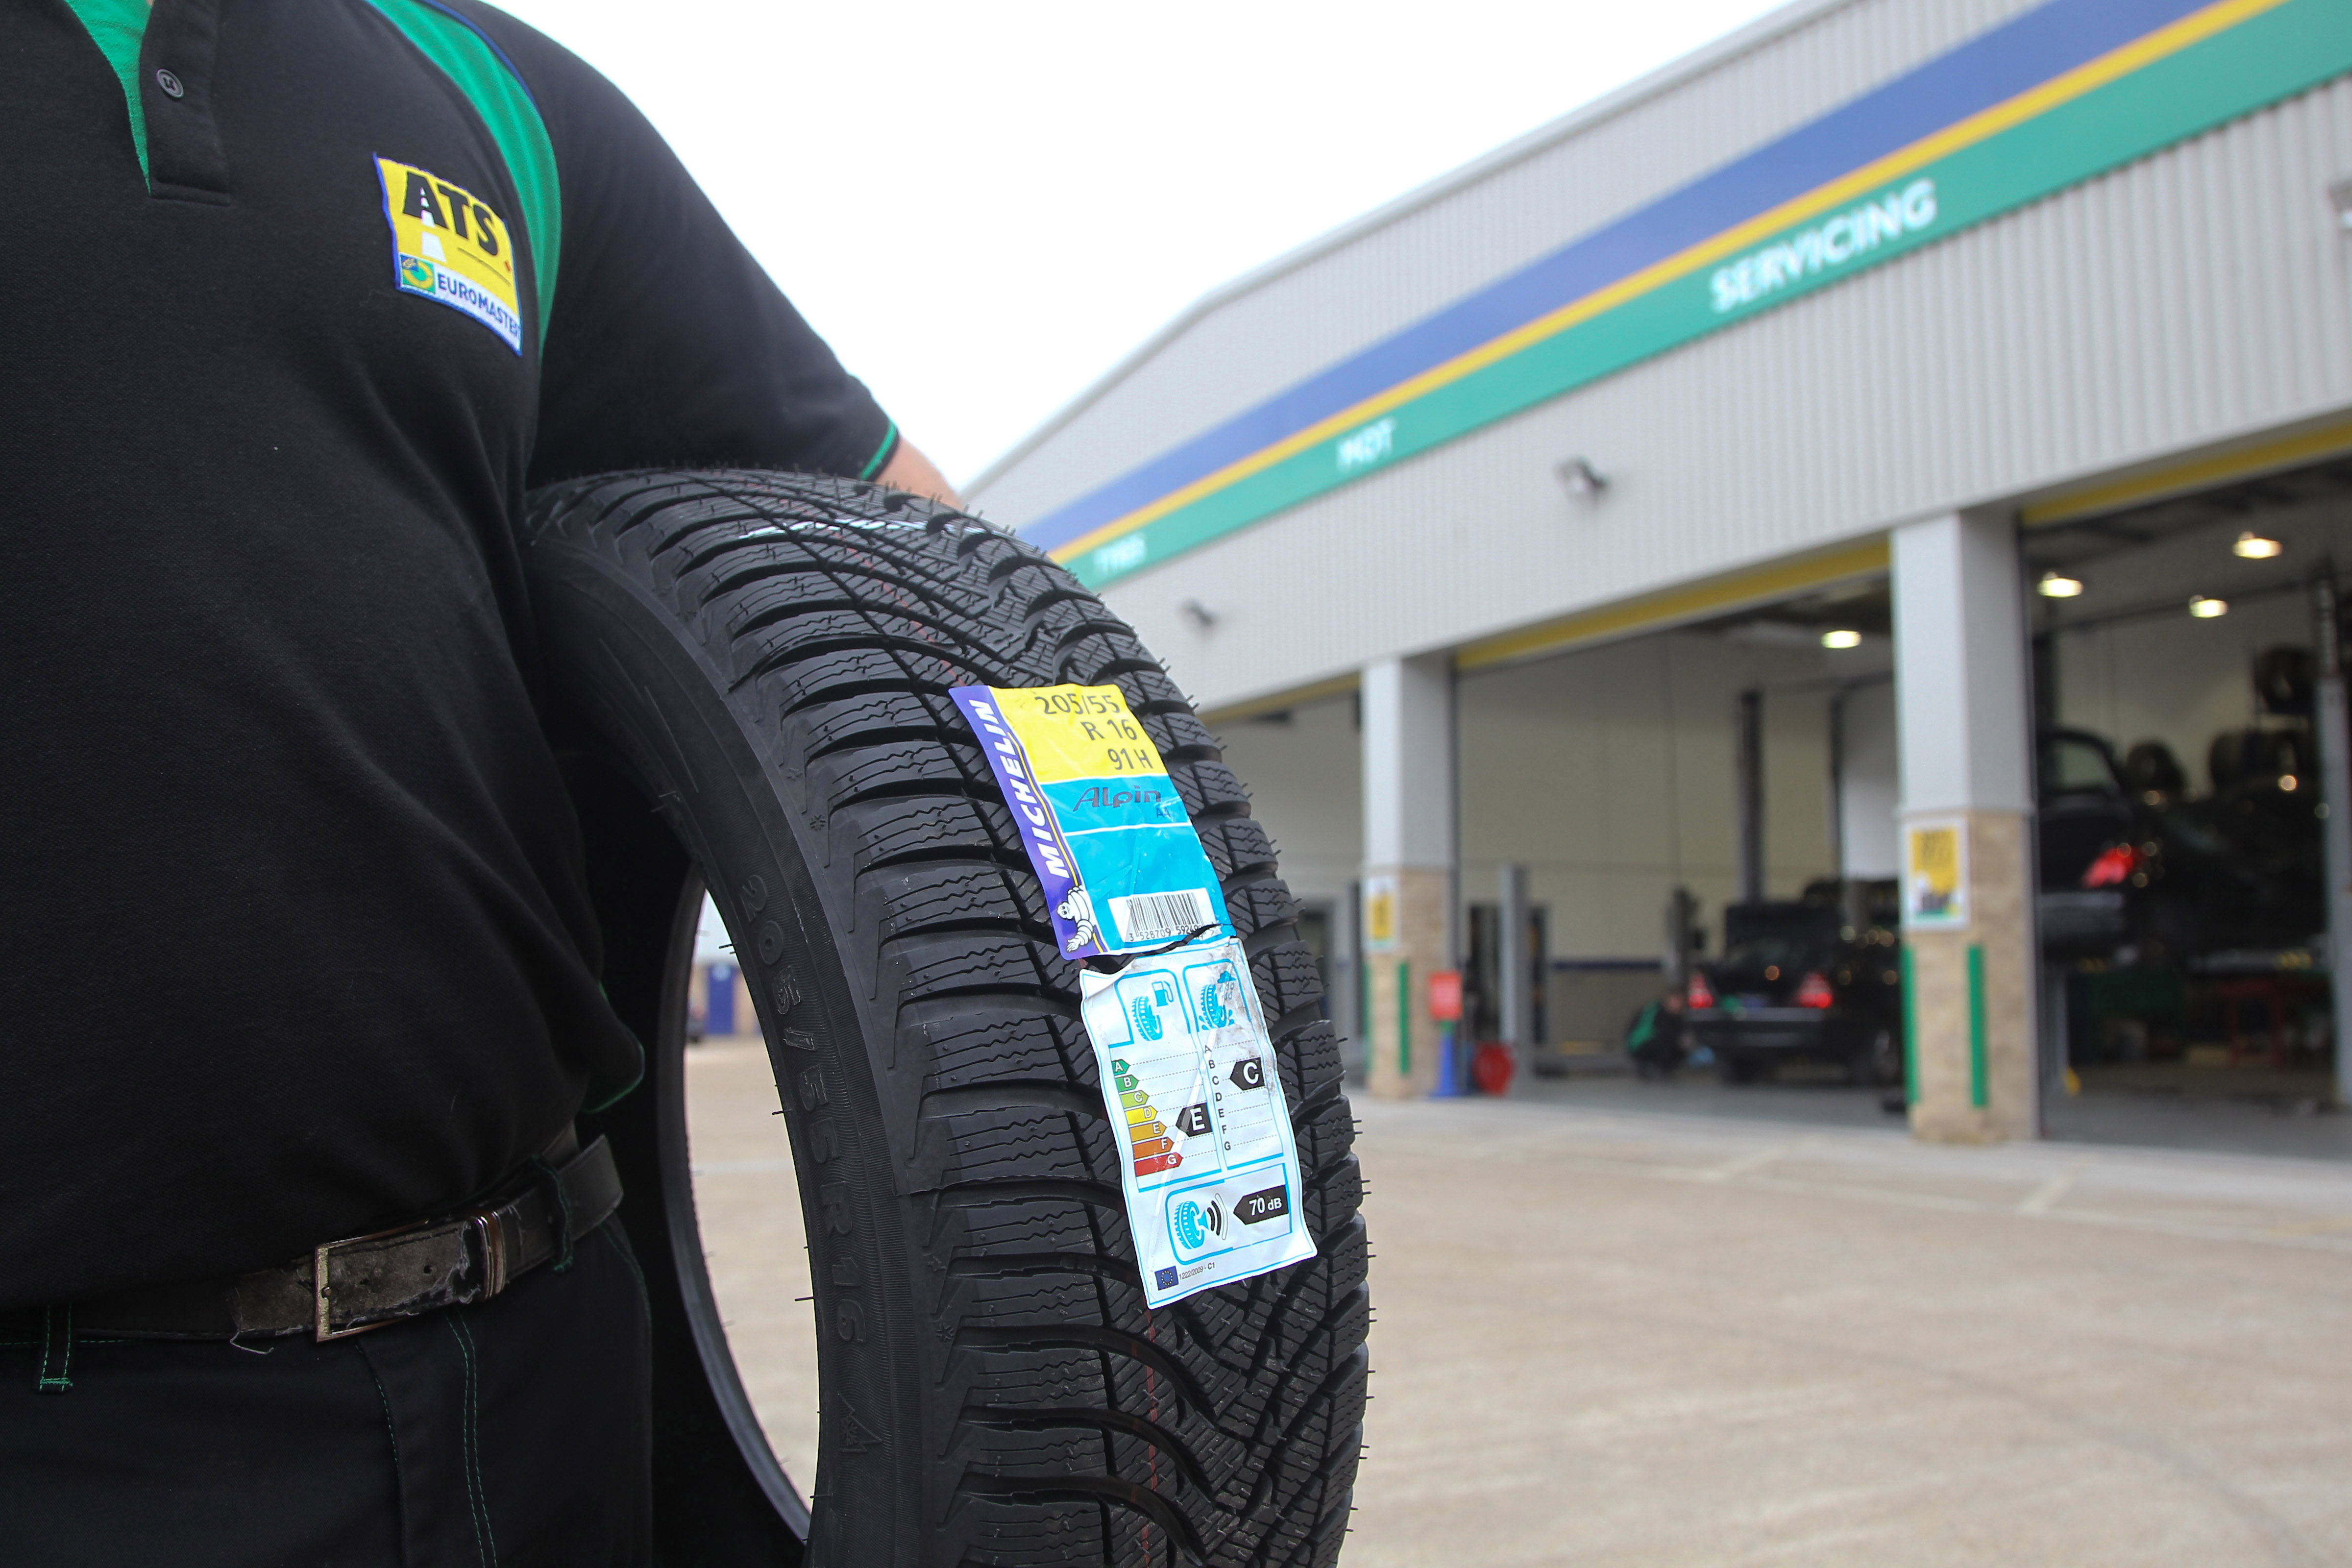 ATS Euromaster and Kal Tire forge heavy-duty partnership